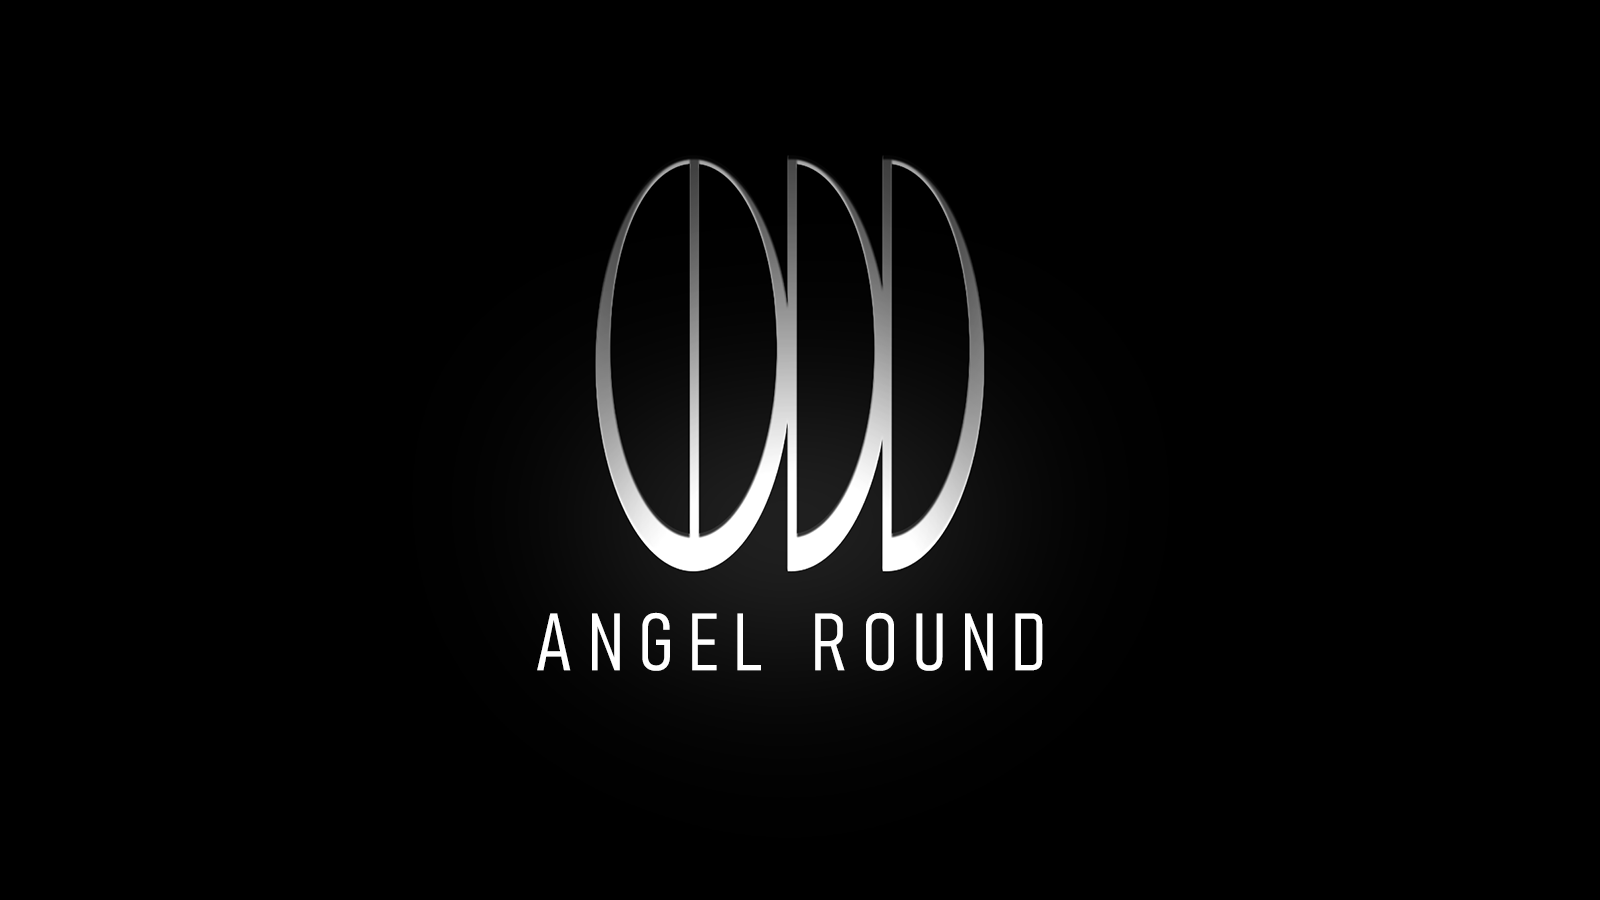 Announcing our £150k angel round